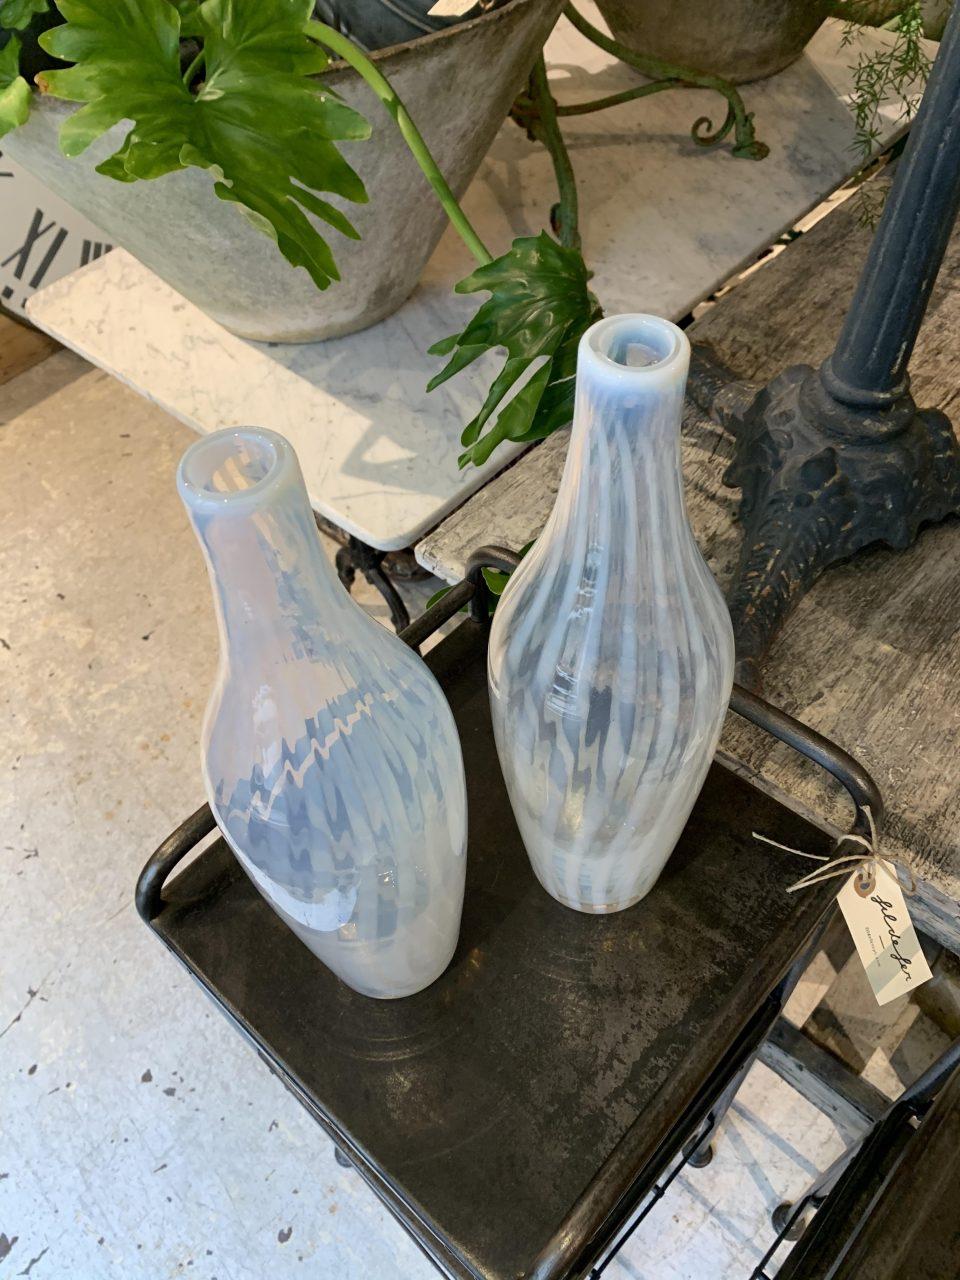 Lovely pair of tall slim and exceptionally beautiful semi-transparent hand blown glass vases, designed as elegant bottles. Produced around the 1960s on the world-famous island of Murano, a stone’s throw from the canal city of Venice in